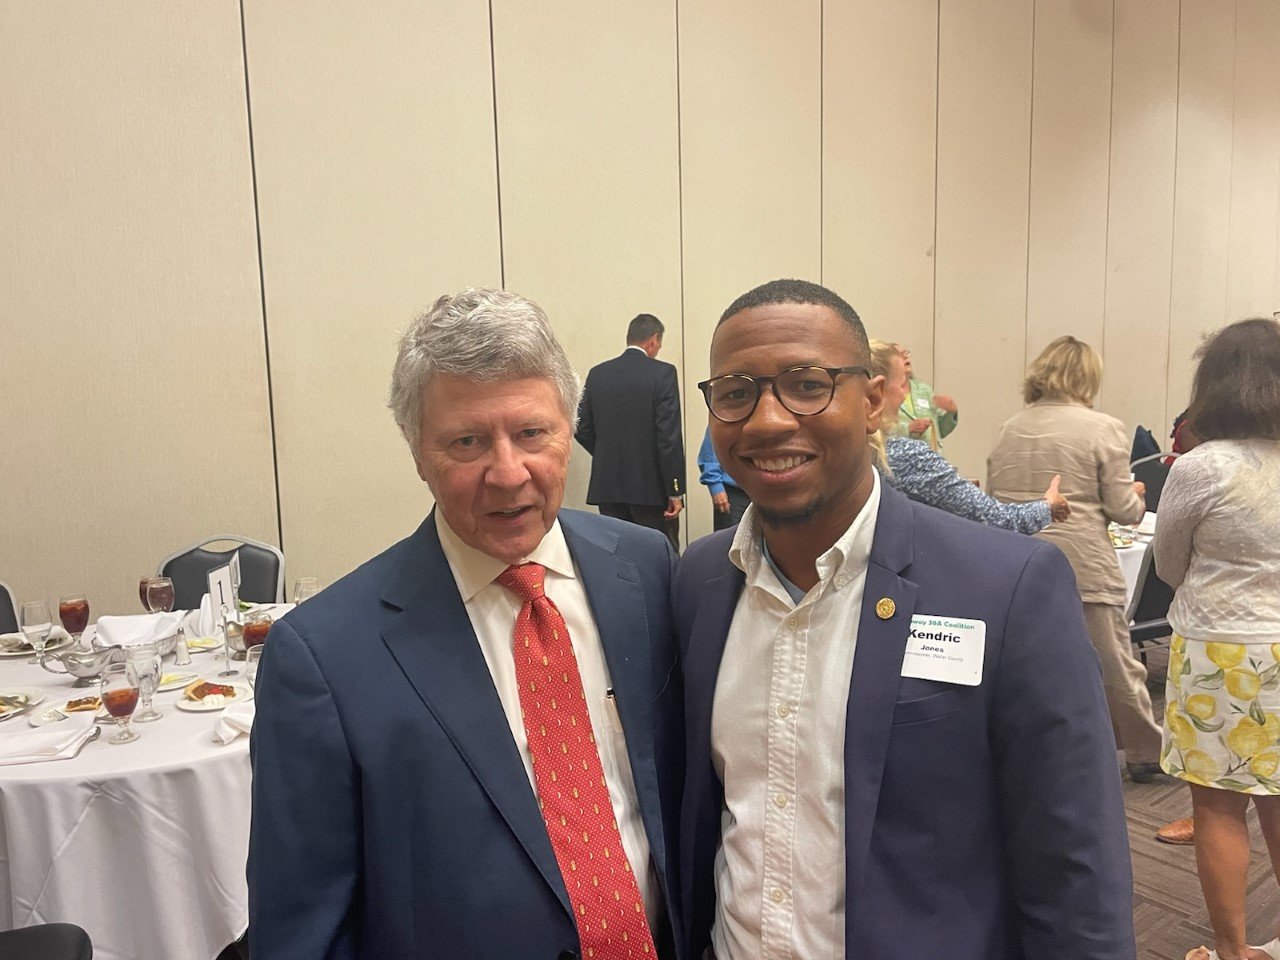 Former Harris County Judge Ed Emmett, now a fellow at the Baker Institute at Rice University, was the keynote speaker at the Aug. 18 Highway 36A Coalition meeting at Prairie View A&M University. Here Emmett poses with Waller County Commissioner Kendric Jones.